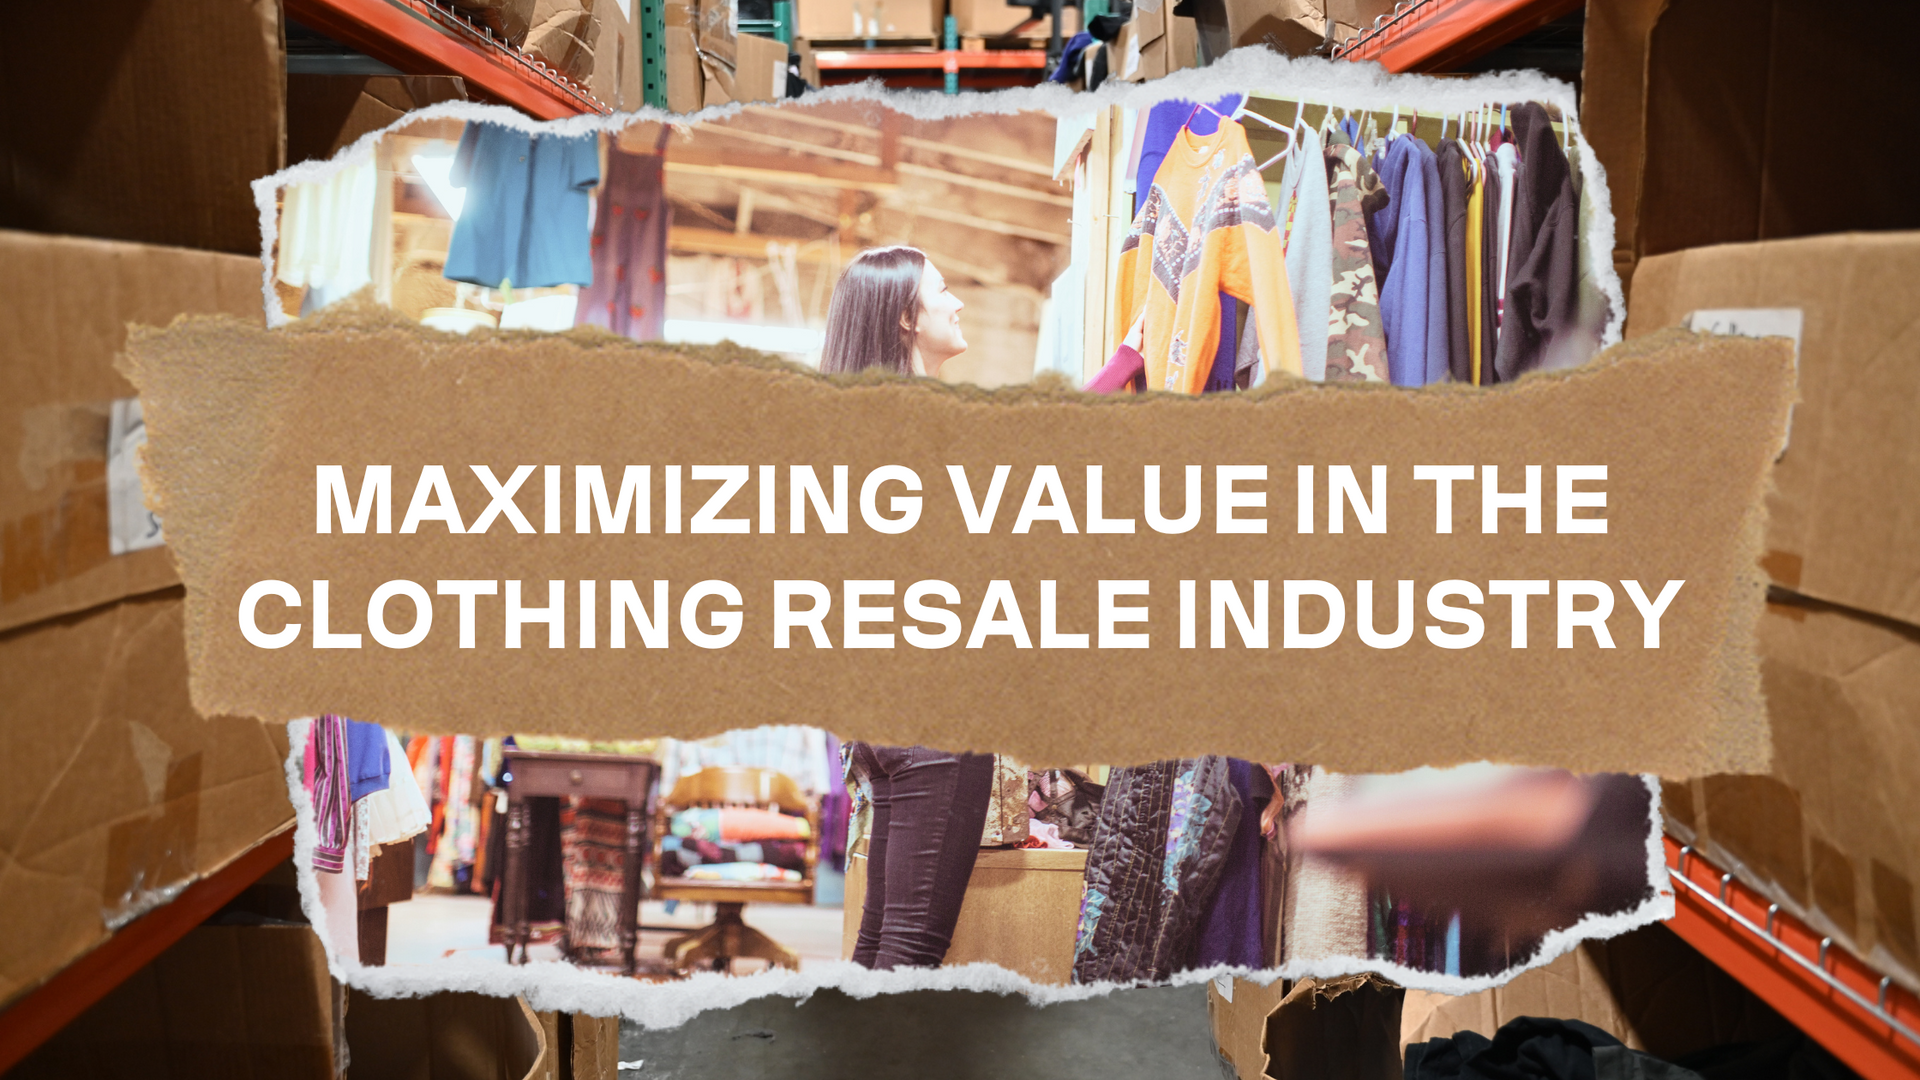 Maximizing Value in the Clothing Resale Industry